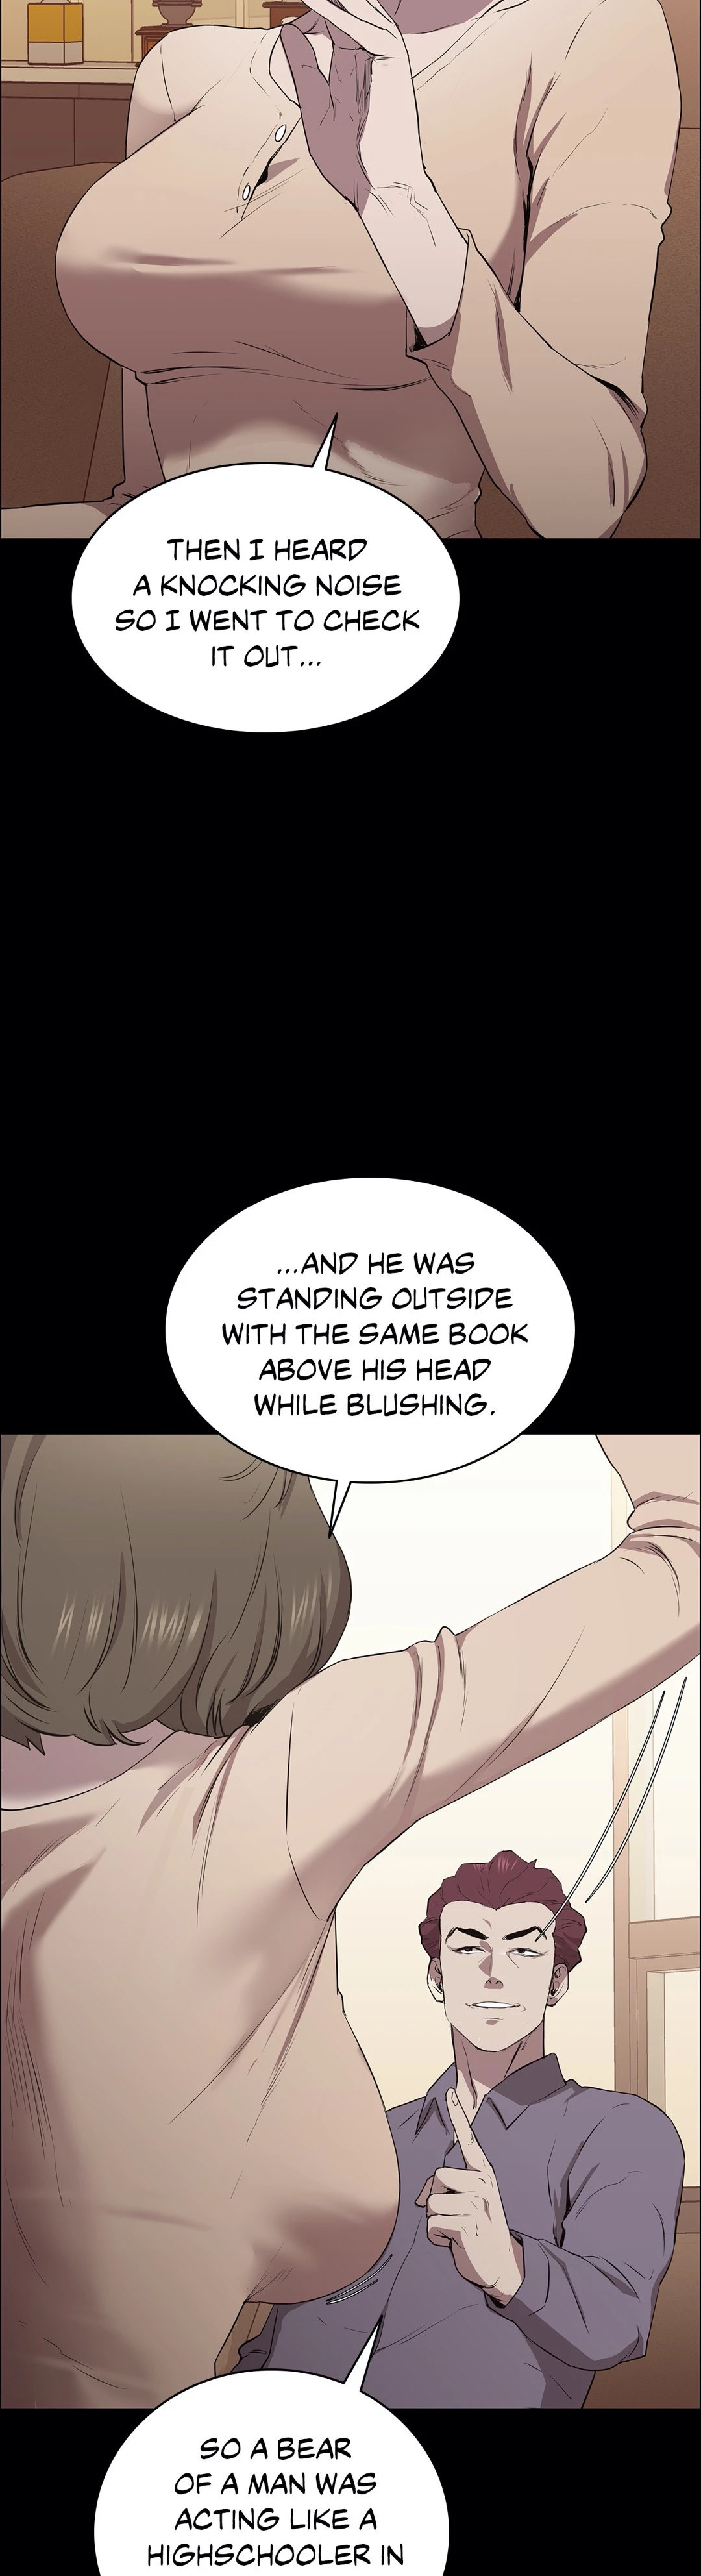 Thorns on Innocence - Chapter 6 Page 42